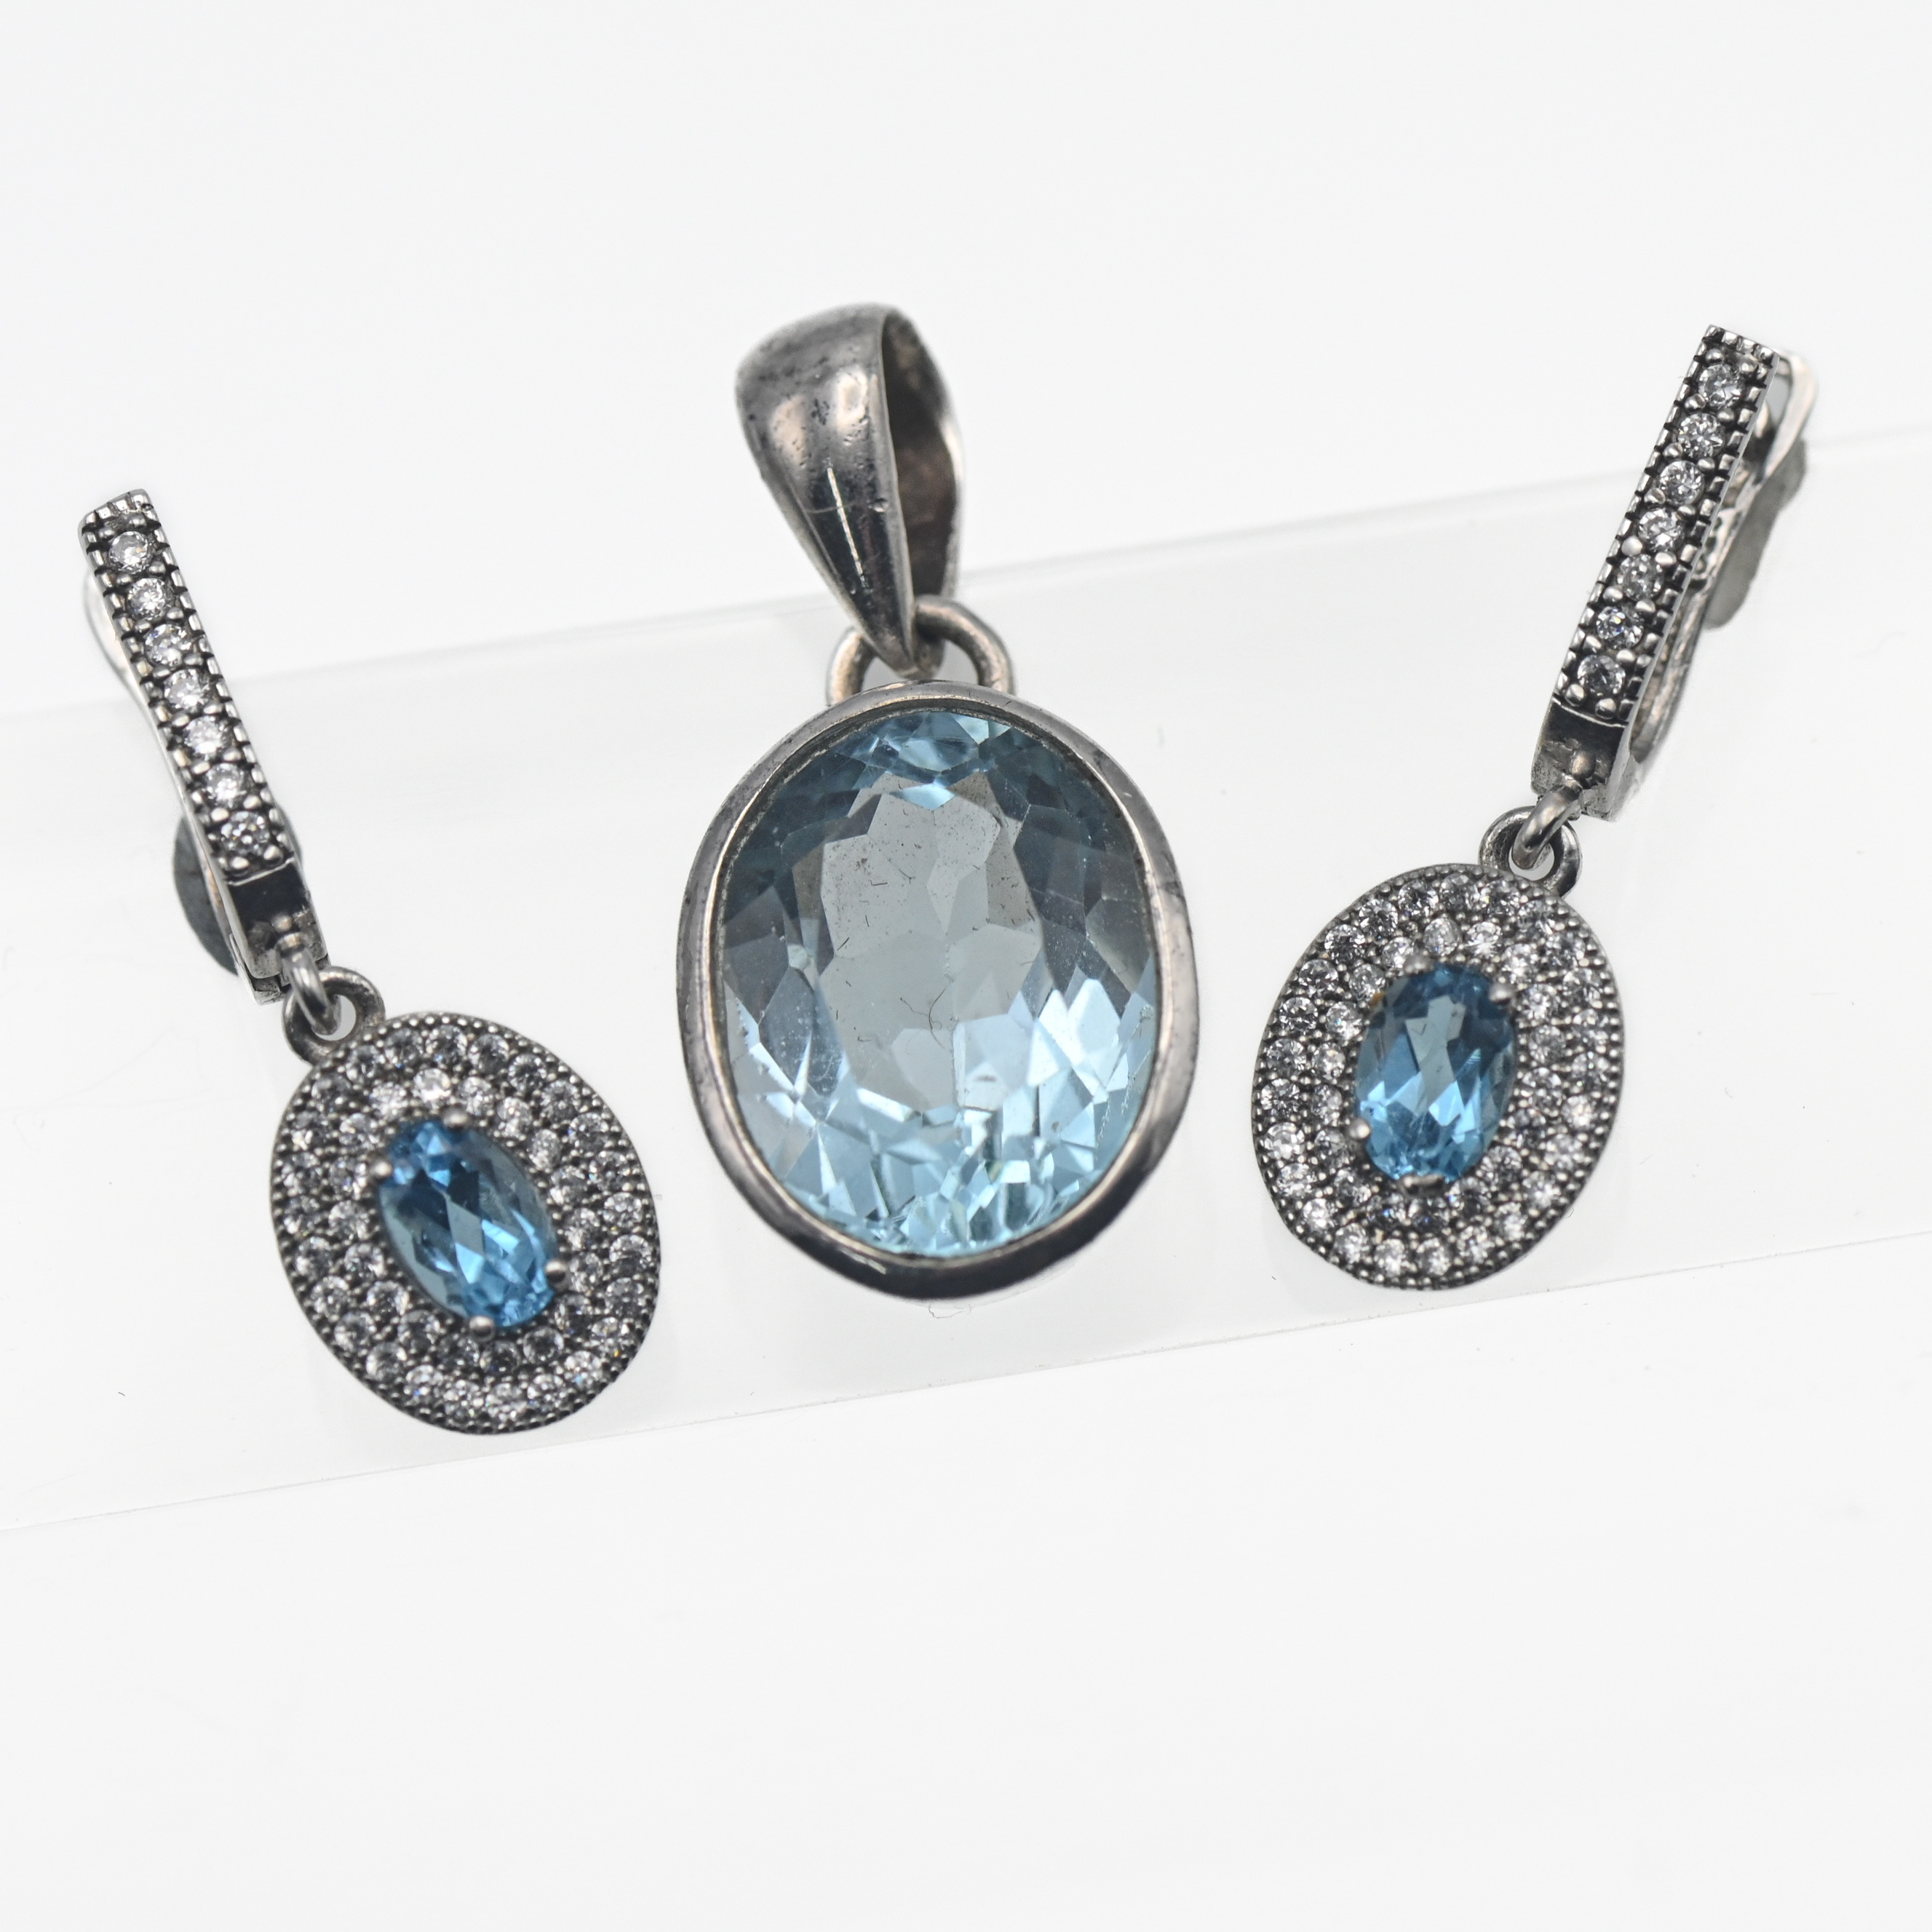 A set of blue topaz oval pendant with a pair of silver blue topaz earrings (3).